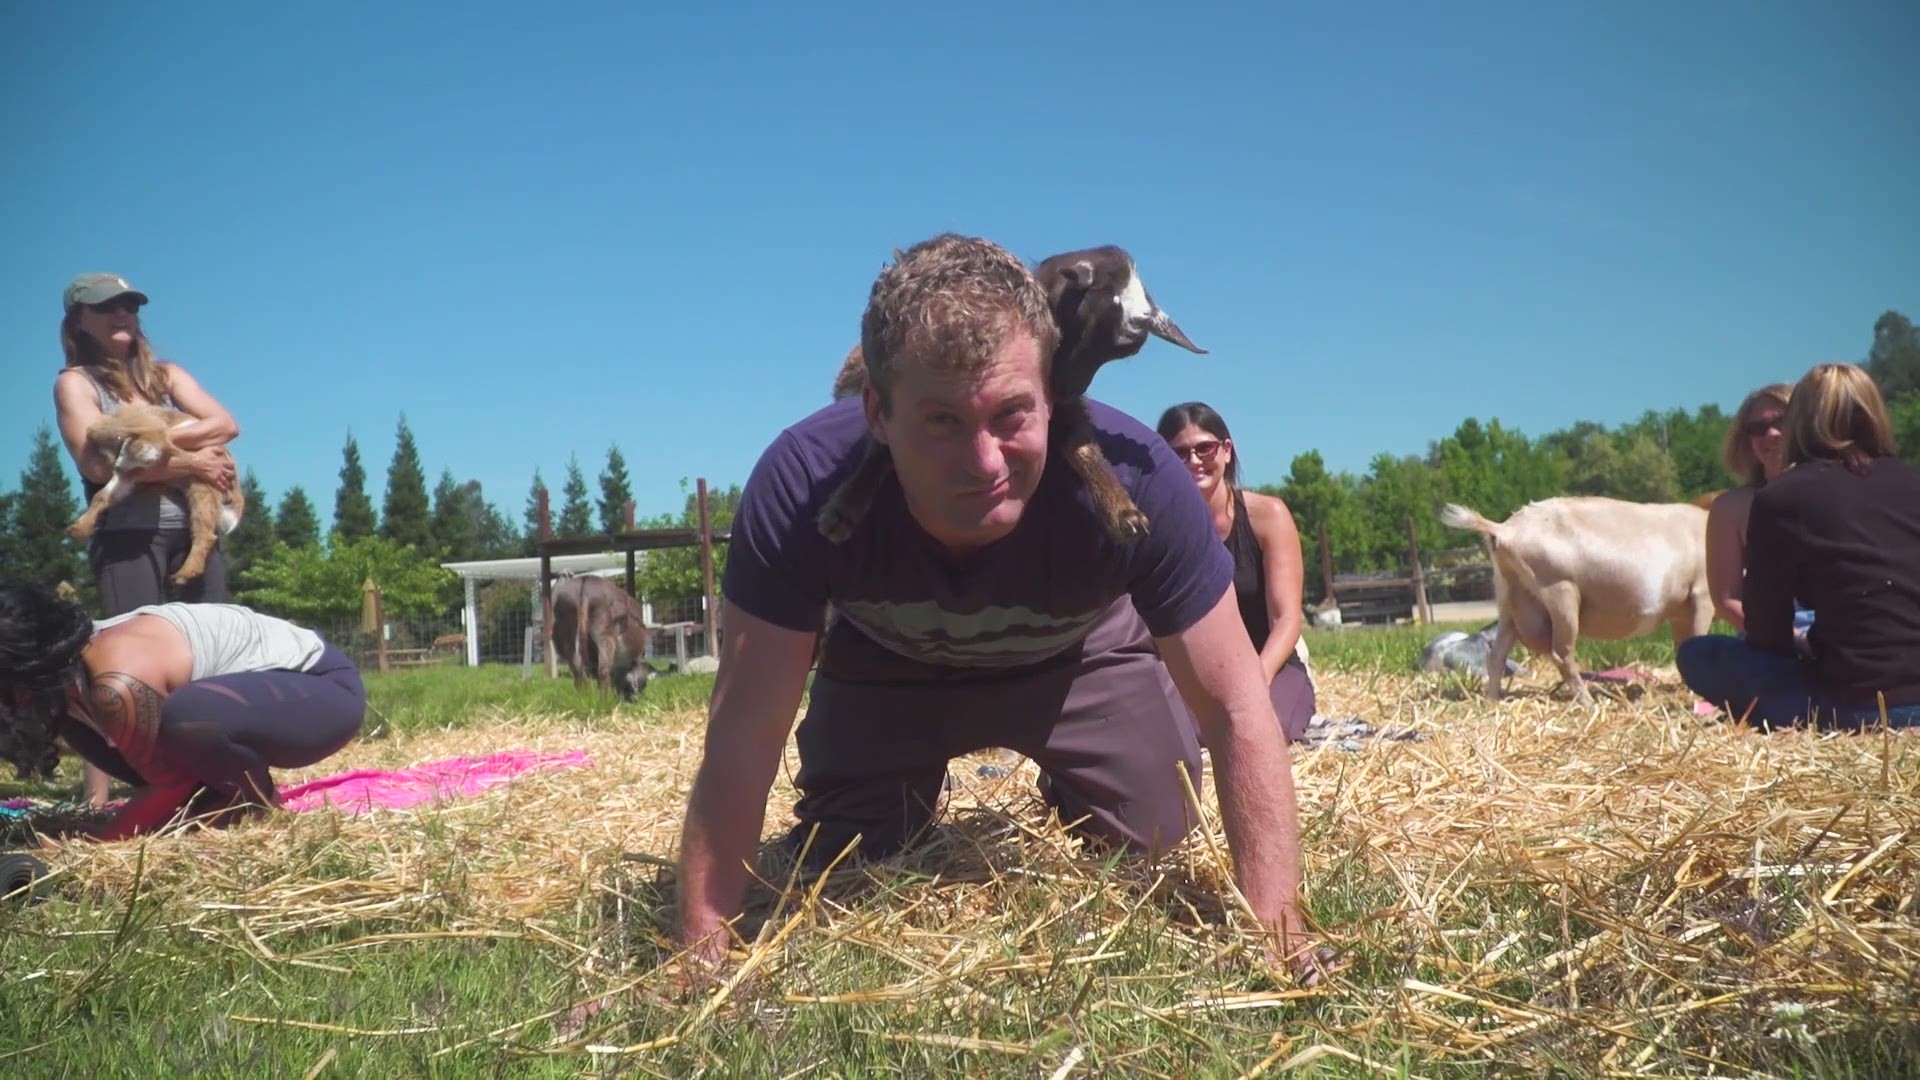 GoatHouse Brewery is now hosting goat yoga classes every few weeks.